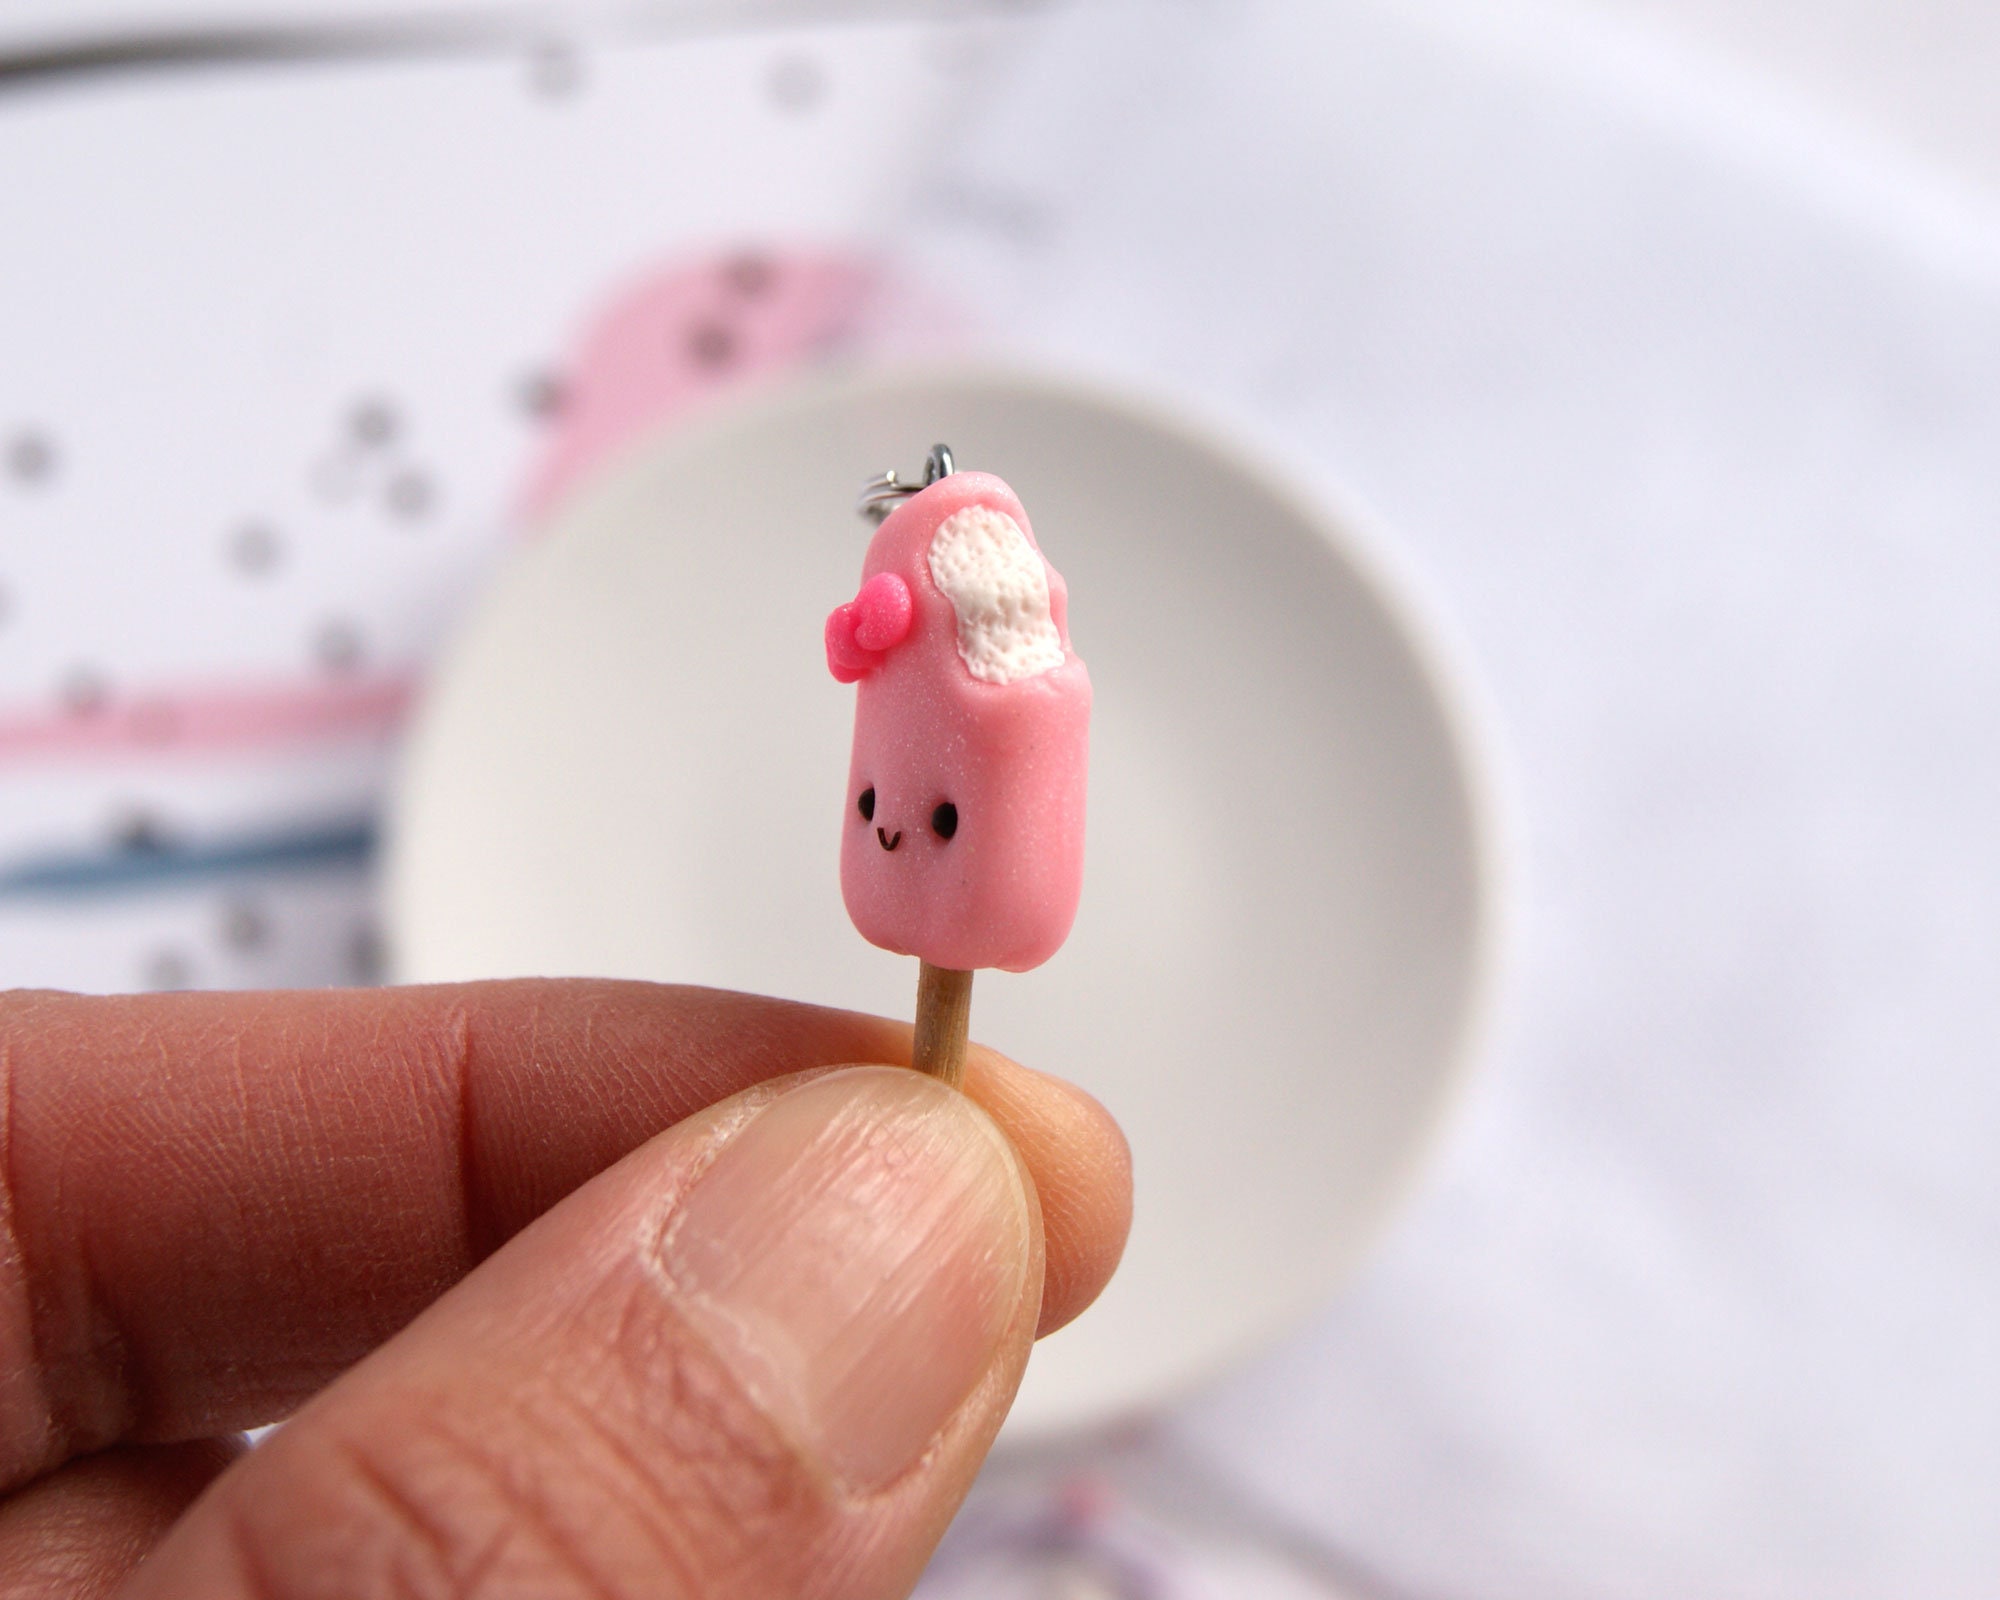 Polymer Clay Tools for Miniature Food Charms